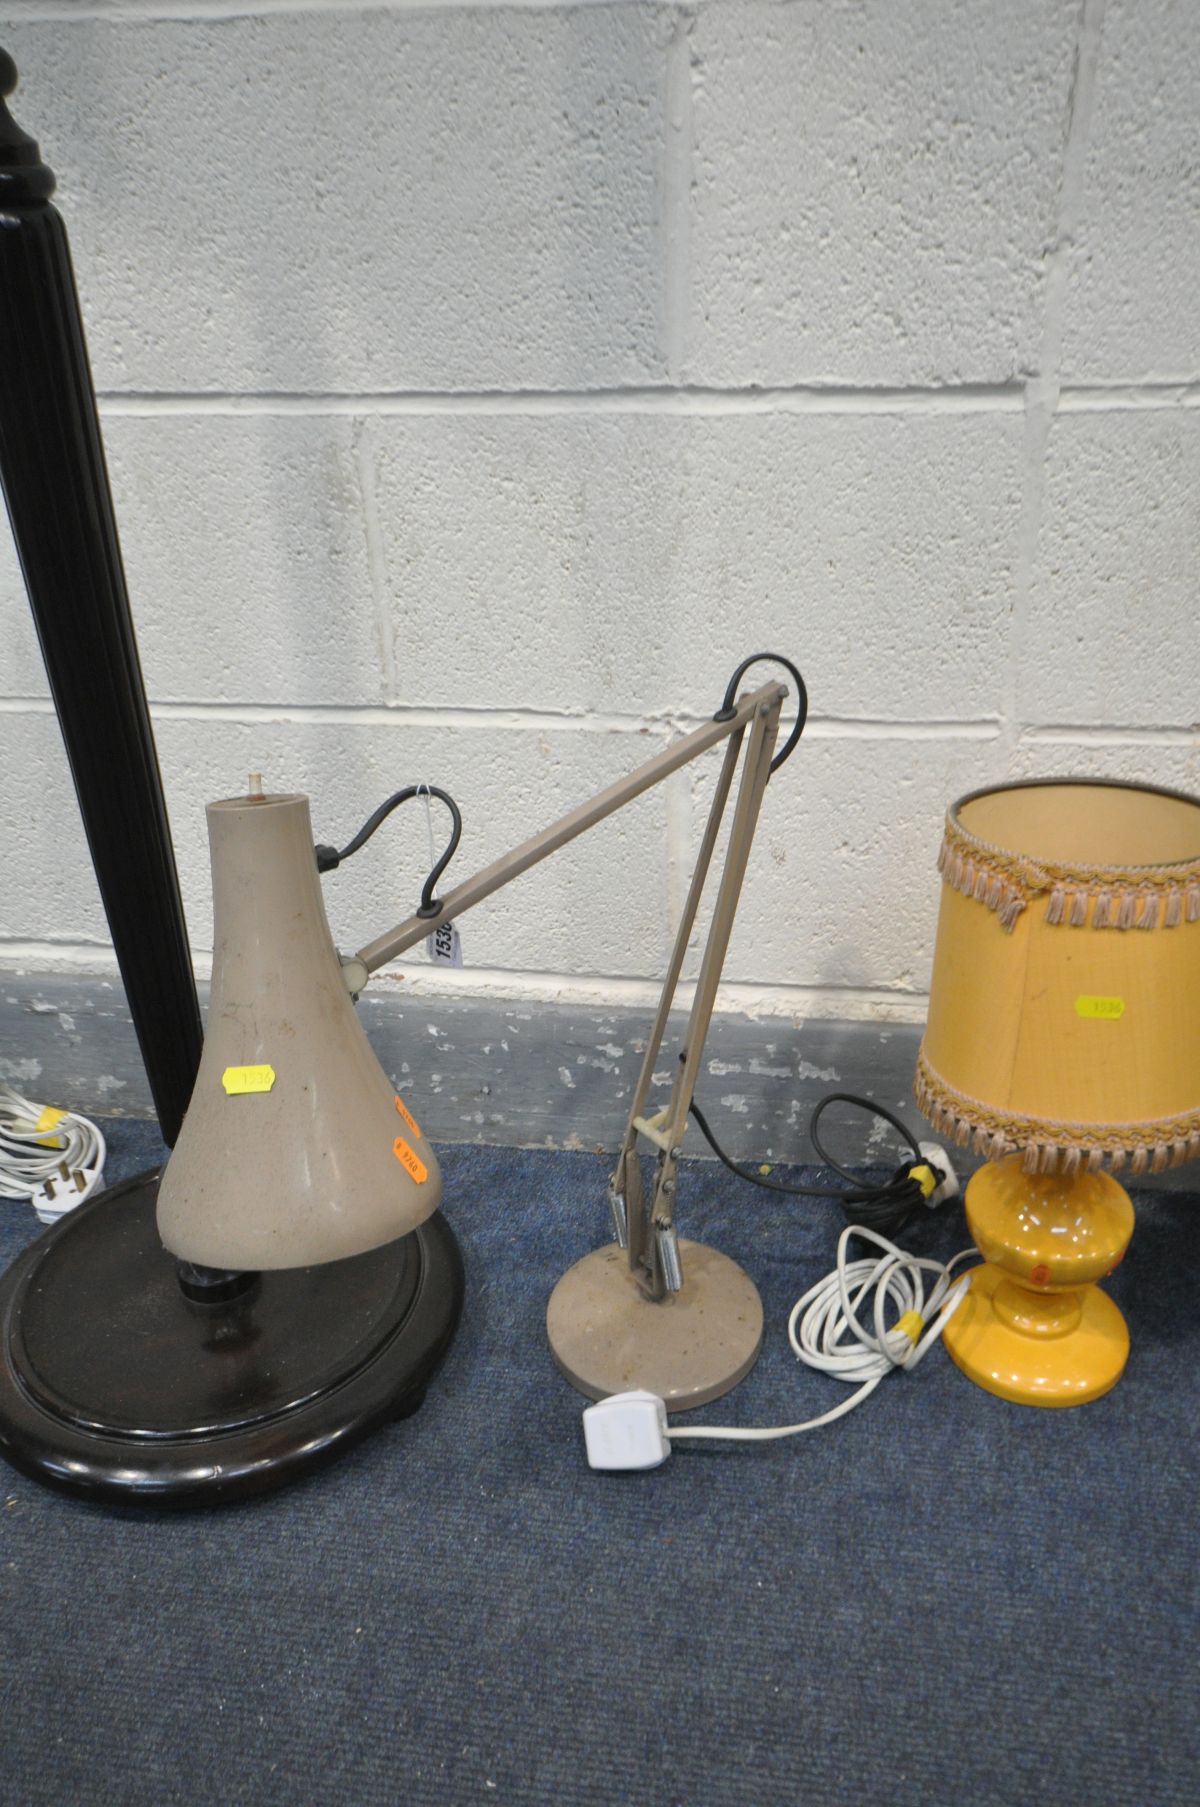 AN ANGLE POISE STYLE DESK LAMP (condition:-dirty and need of cleaning) along with a pair of - Bild 2 aus 3